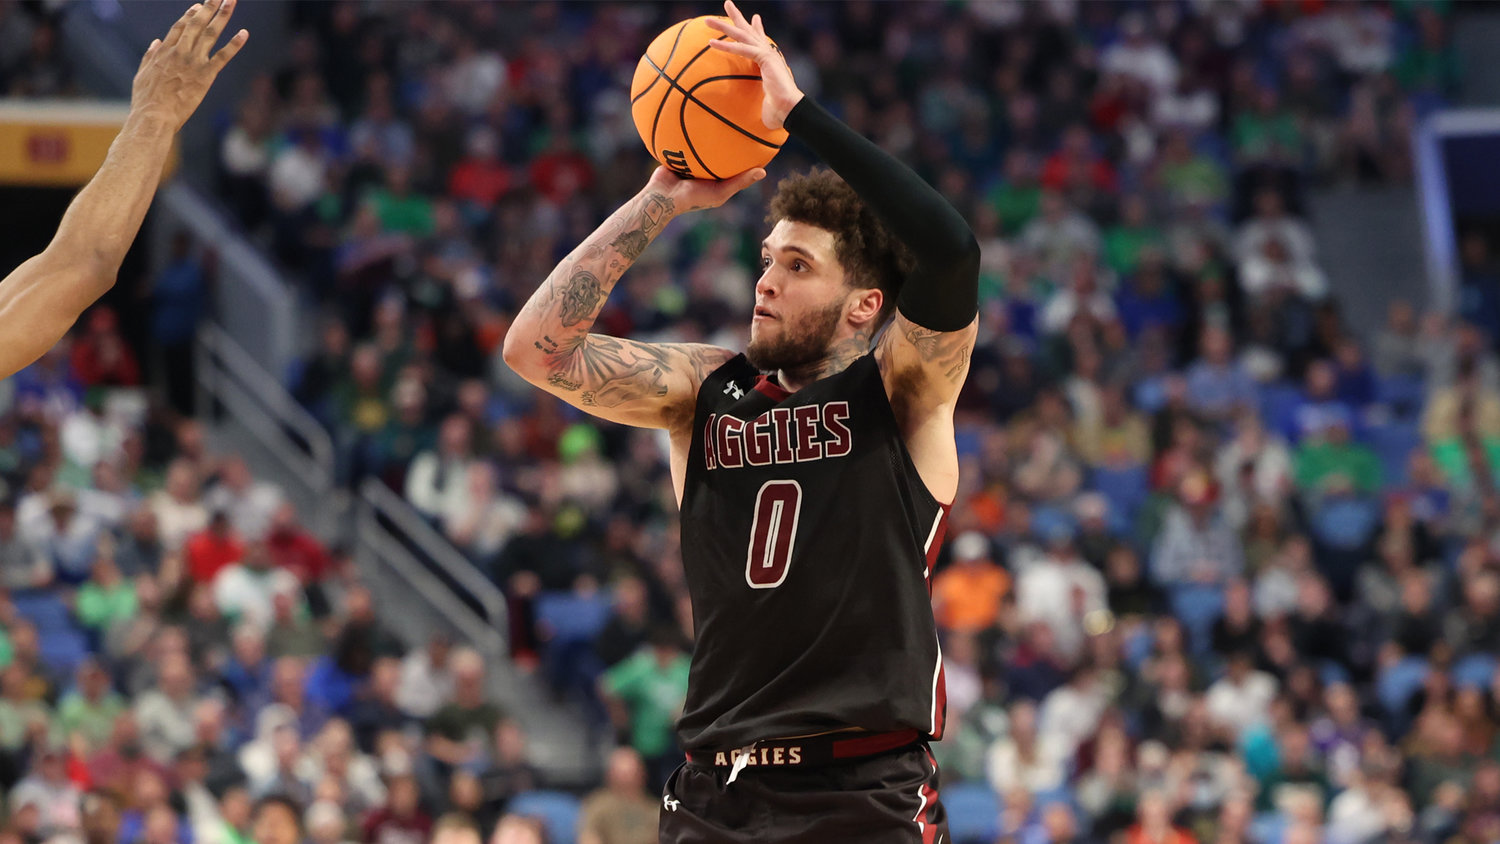 NM State's Teddy Allen vs.UConn in NCAA tournament March17, 2022.